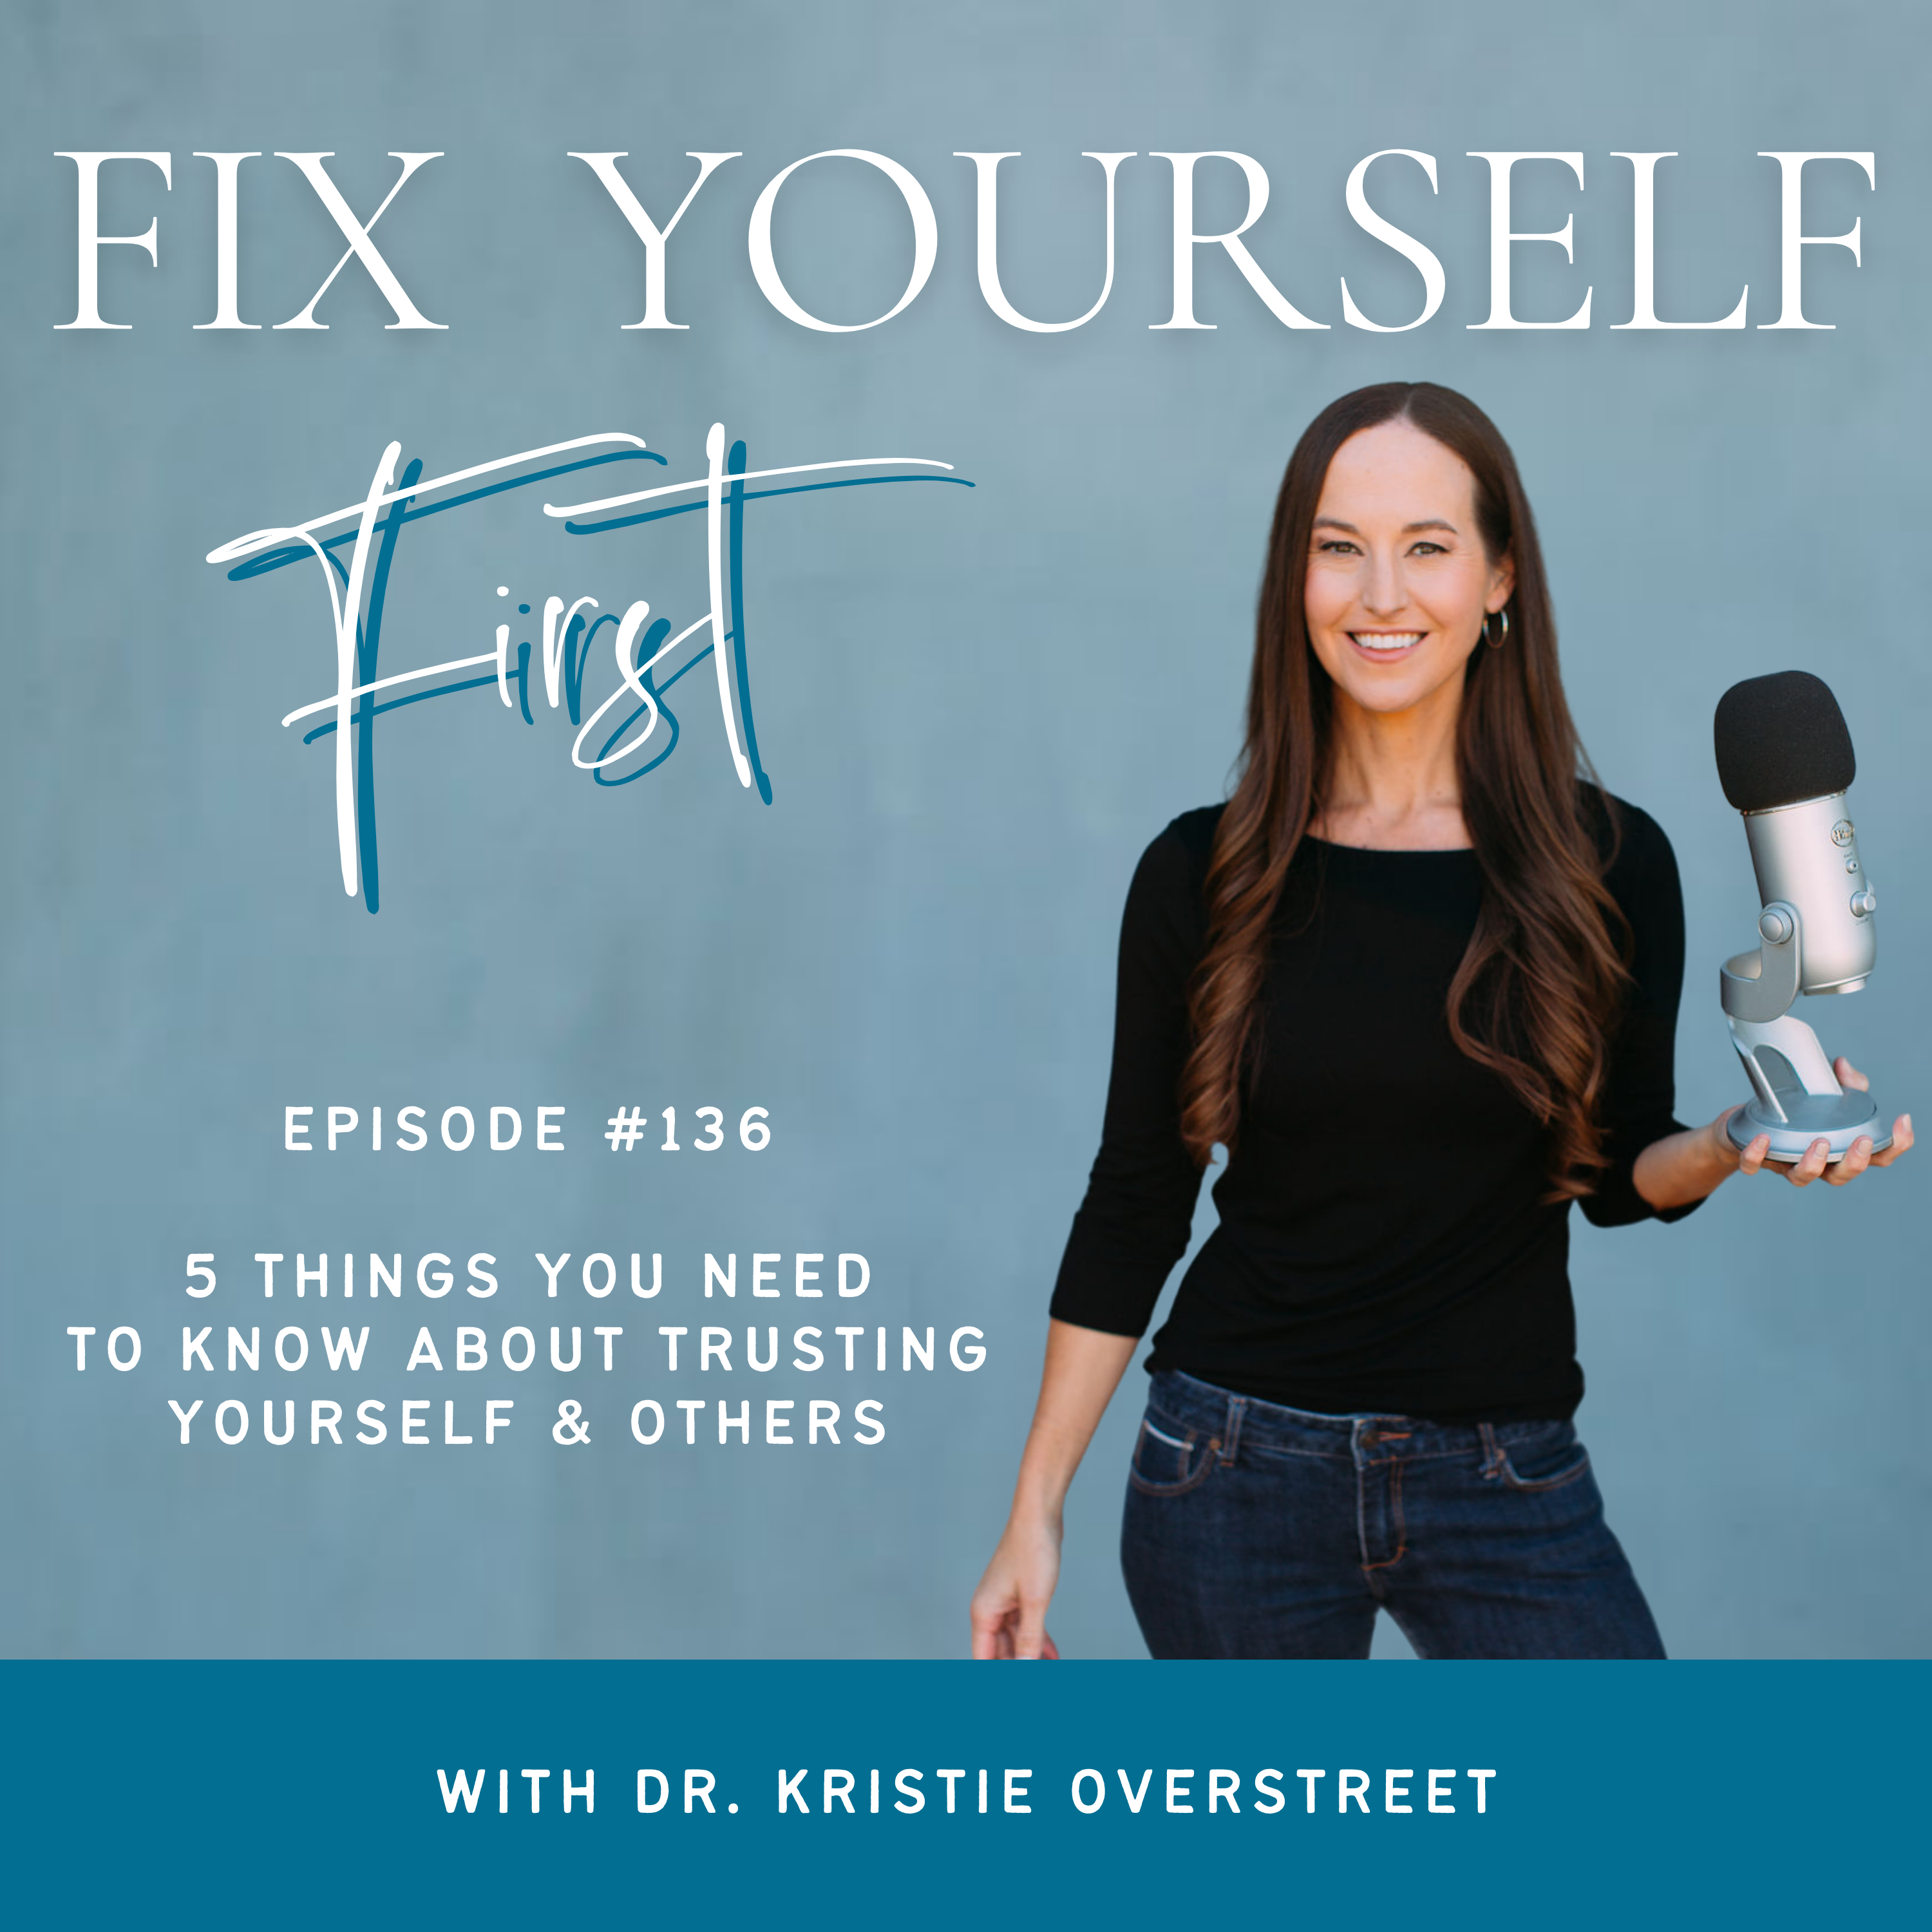 Fix Yourself First Episode 136 5 Things You Need to Know About Trusting Yourself & Others